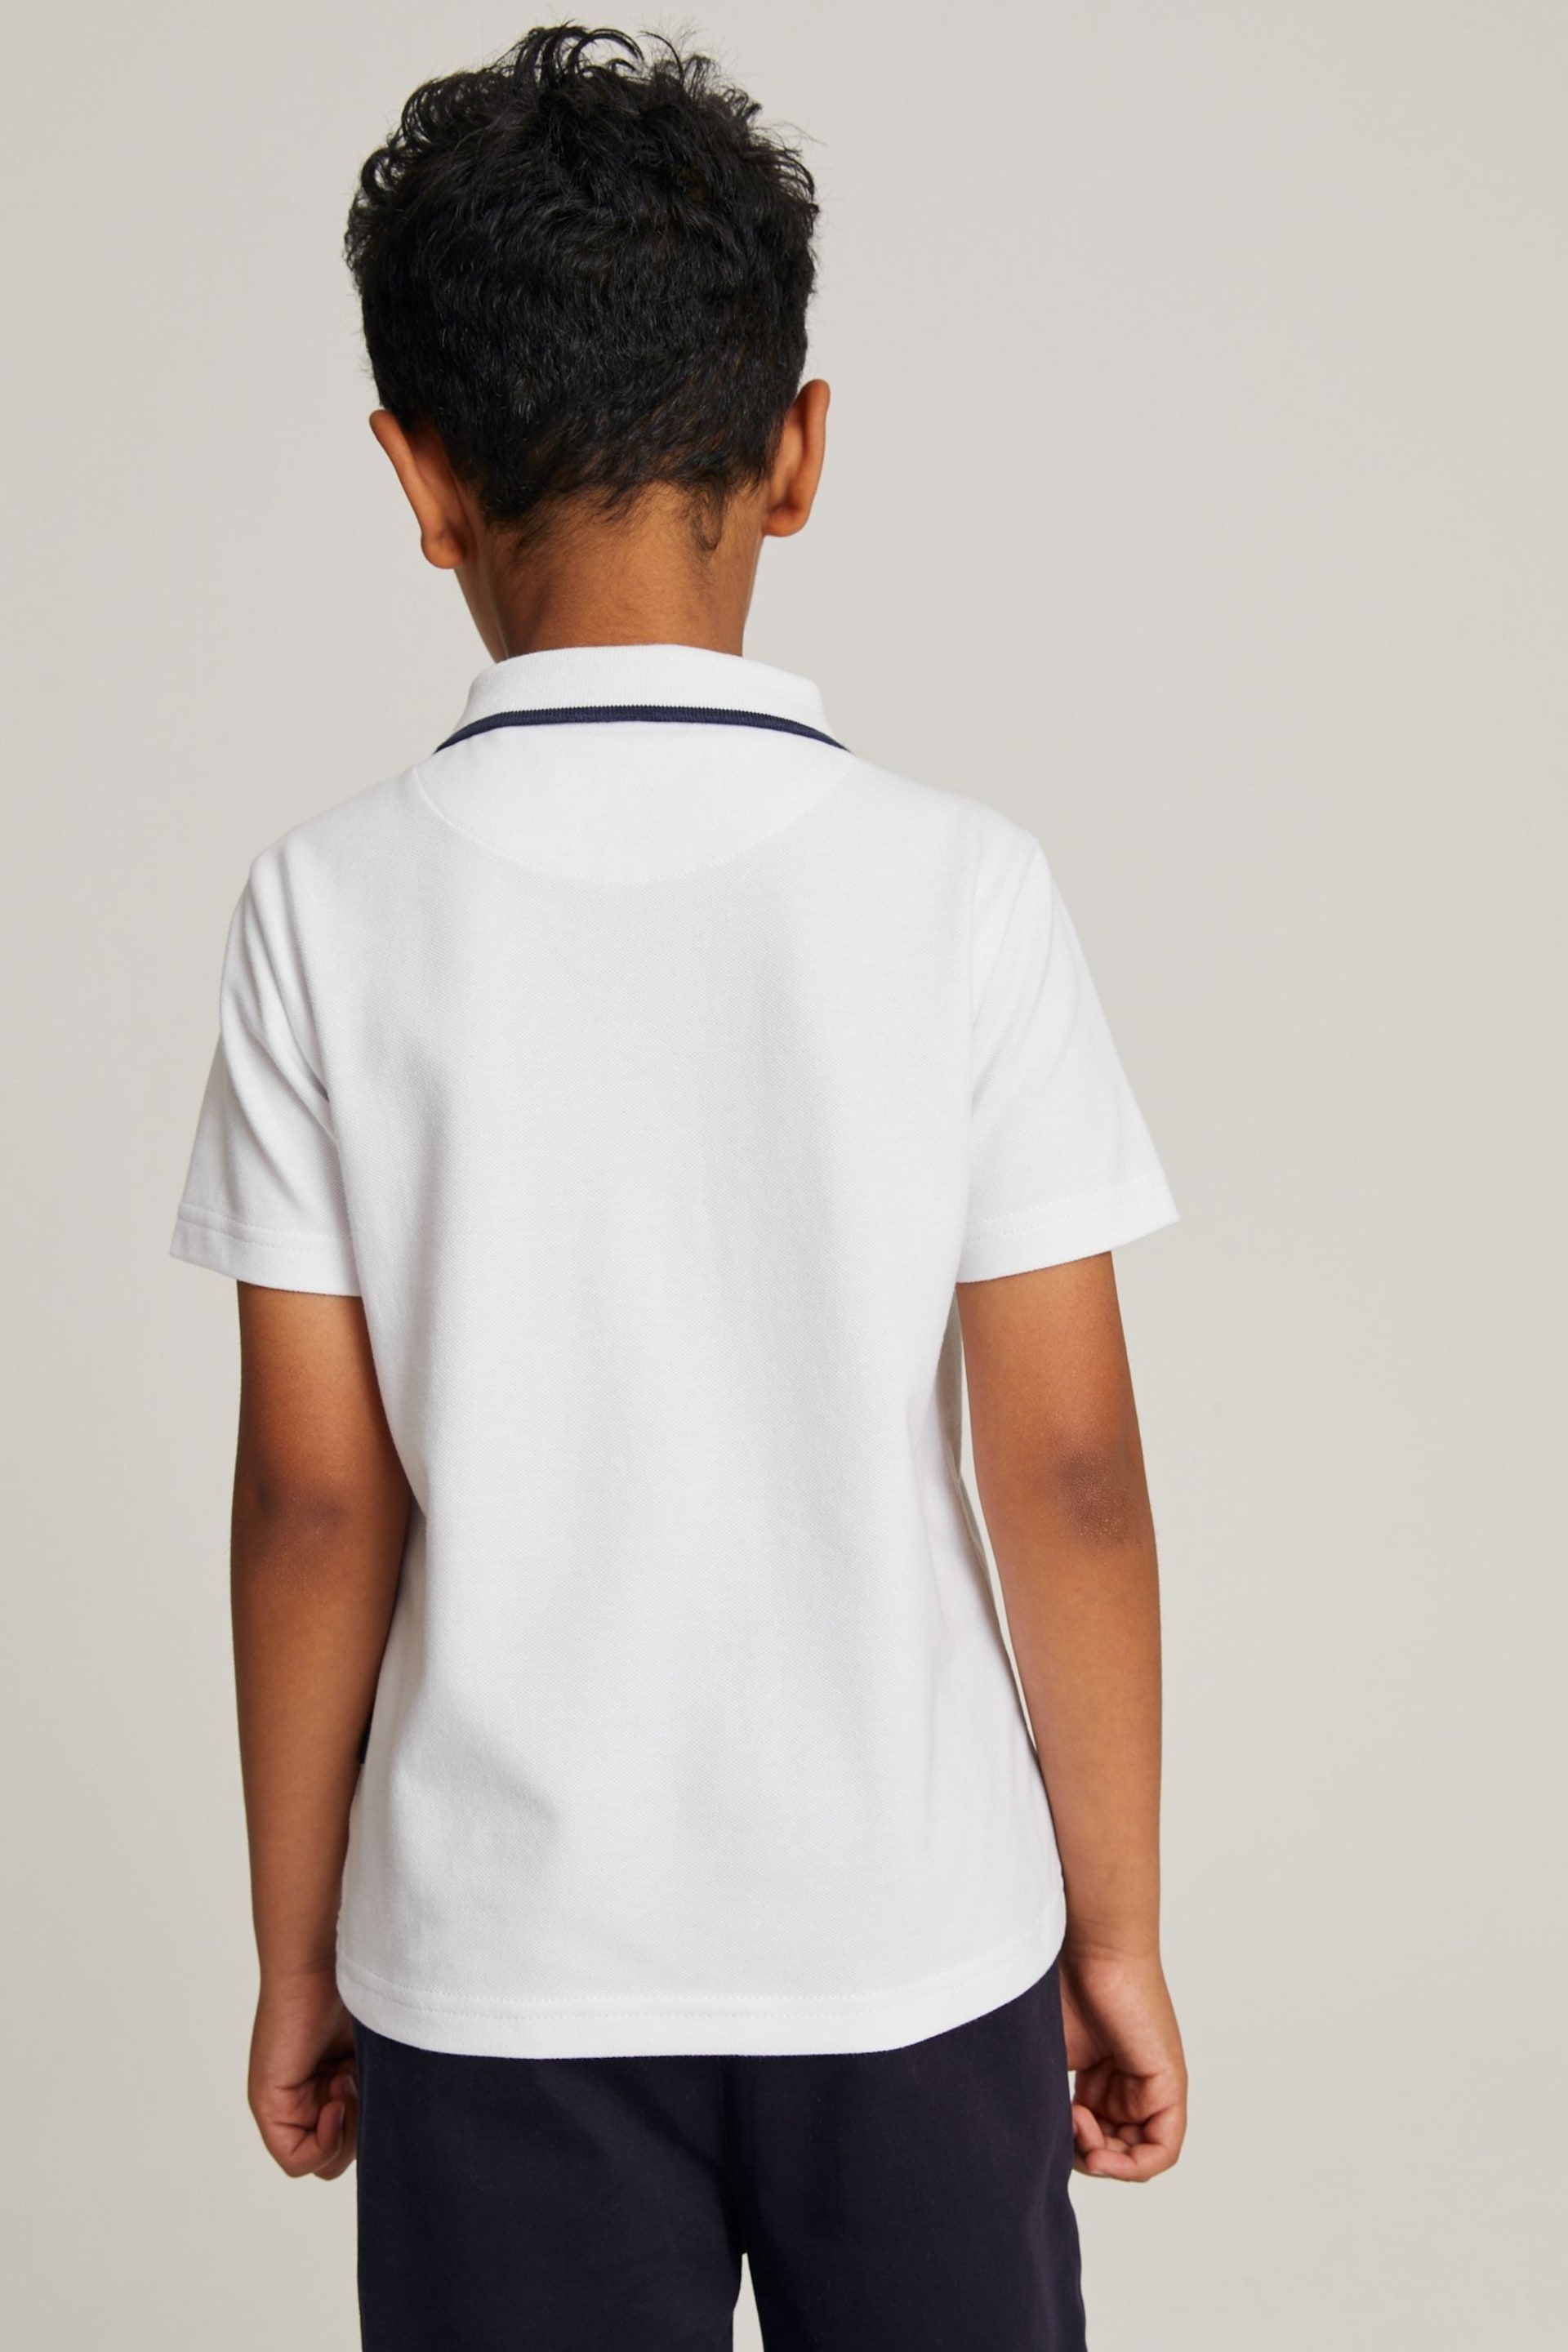 Baker by Ted Baker Polo Shirt - Image 2 of 8